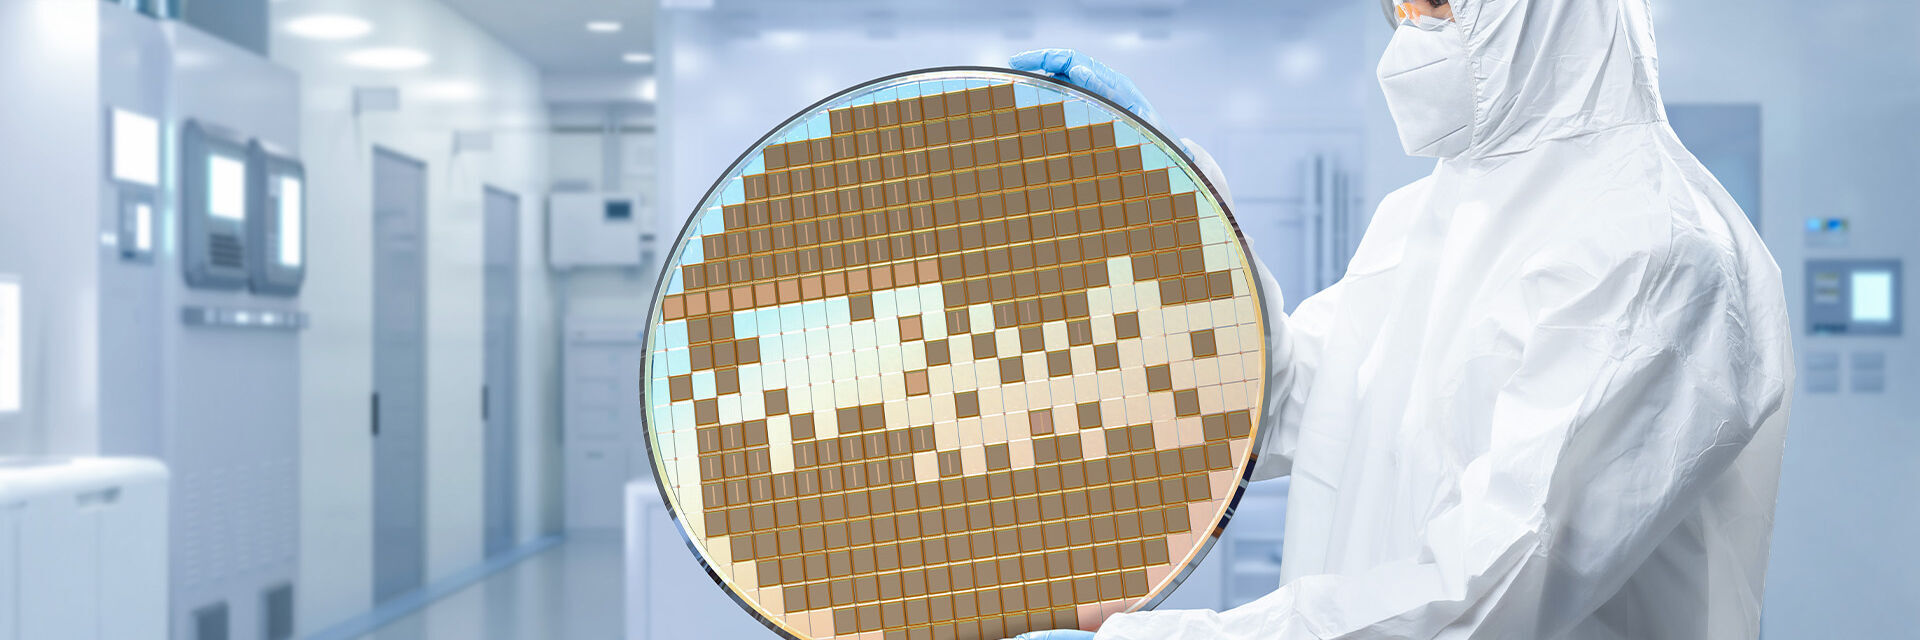 Achieve fast and reliable wafer and semiconductor inspection for wafer processing, as well as IC packaging, assembly, and testing, with microscope and sample preparation solutions.